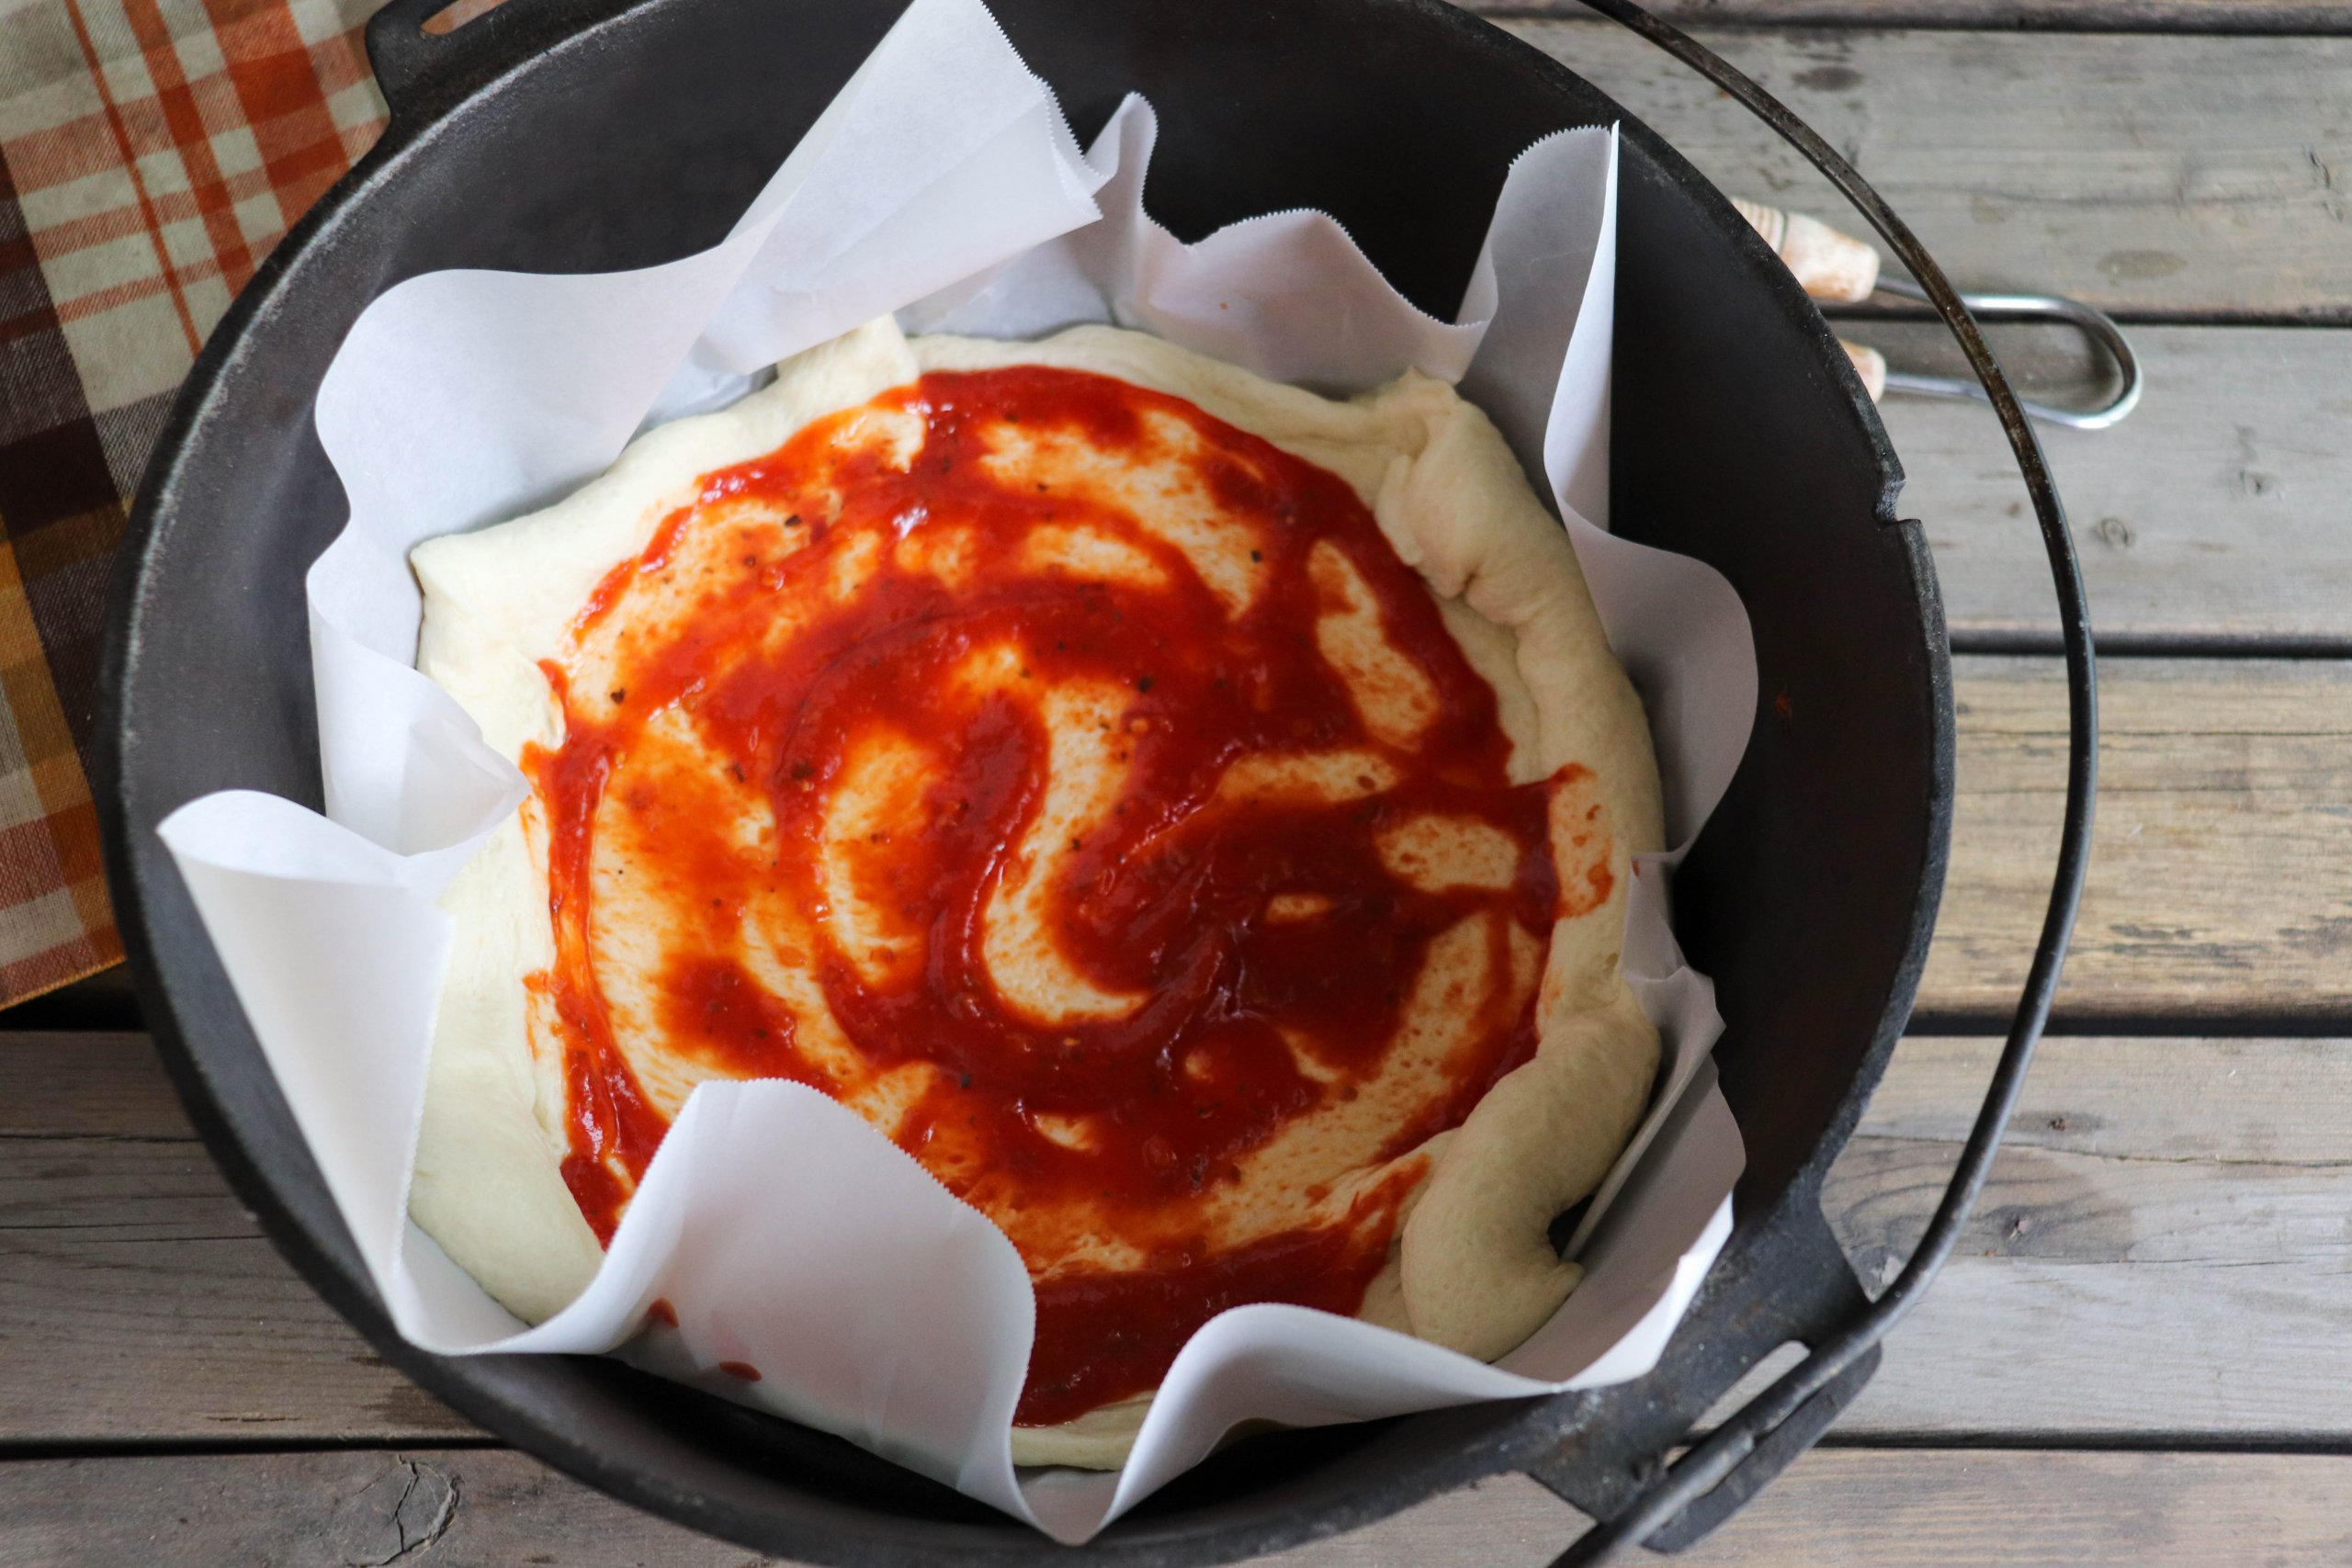 Pizza dough with tomato sauce spread on top in a cast iron dutch oven with parchment paper liner on a picnic table.